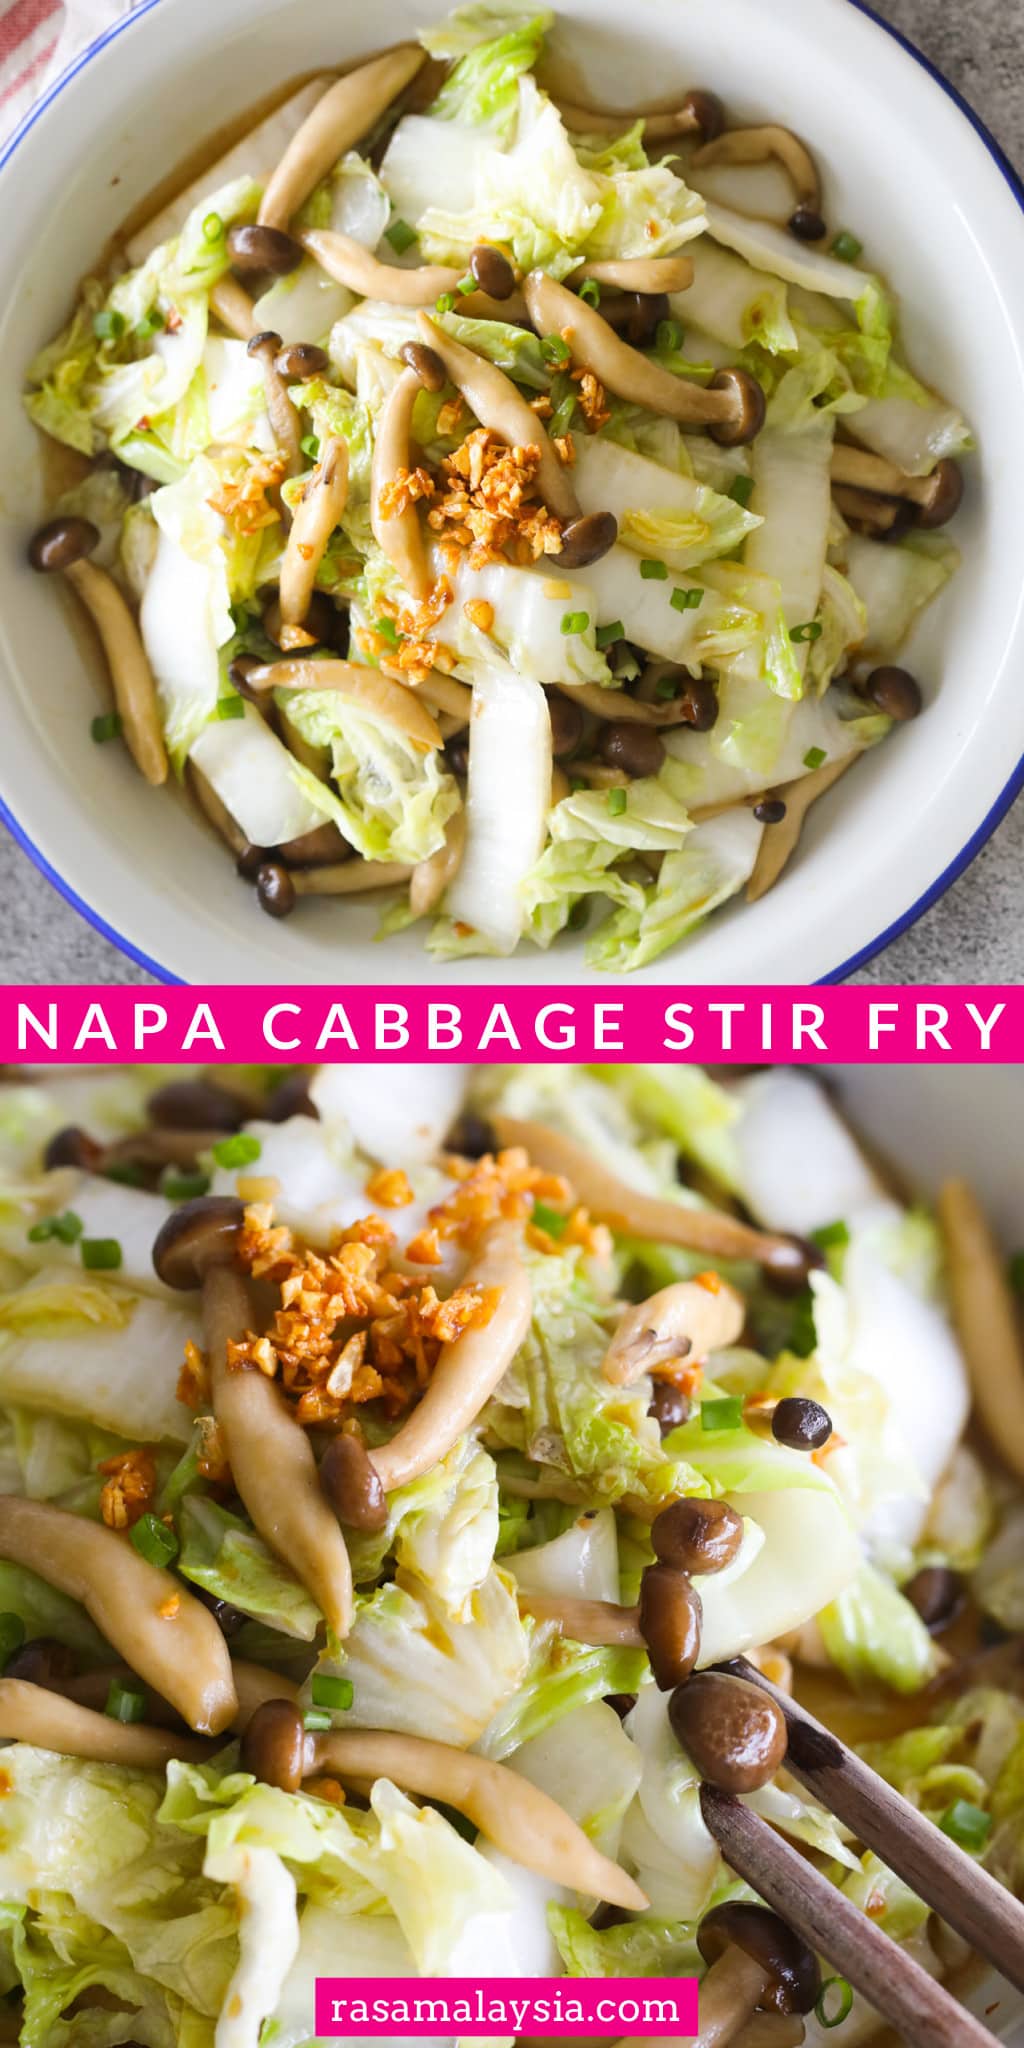 Easy Napa cabbage stir fry with mushroom is one of the best Napa cabbage recipes. It's fresh and healthy with 5 ingredients and takes only 15 mins to make!